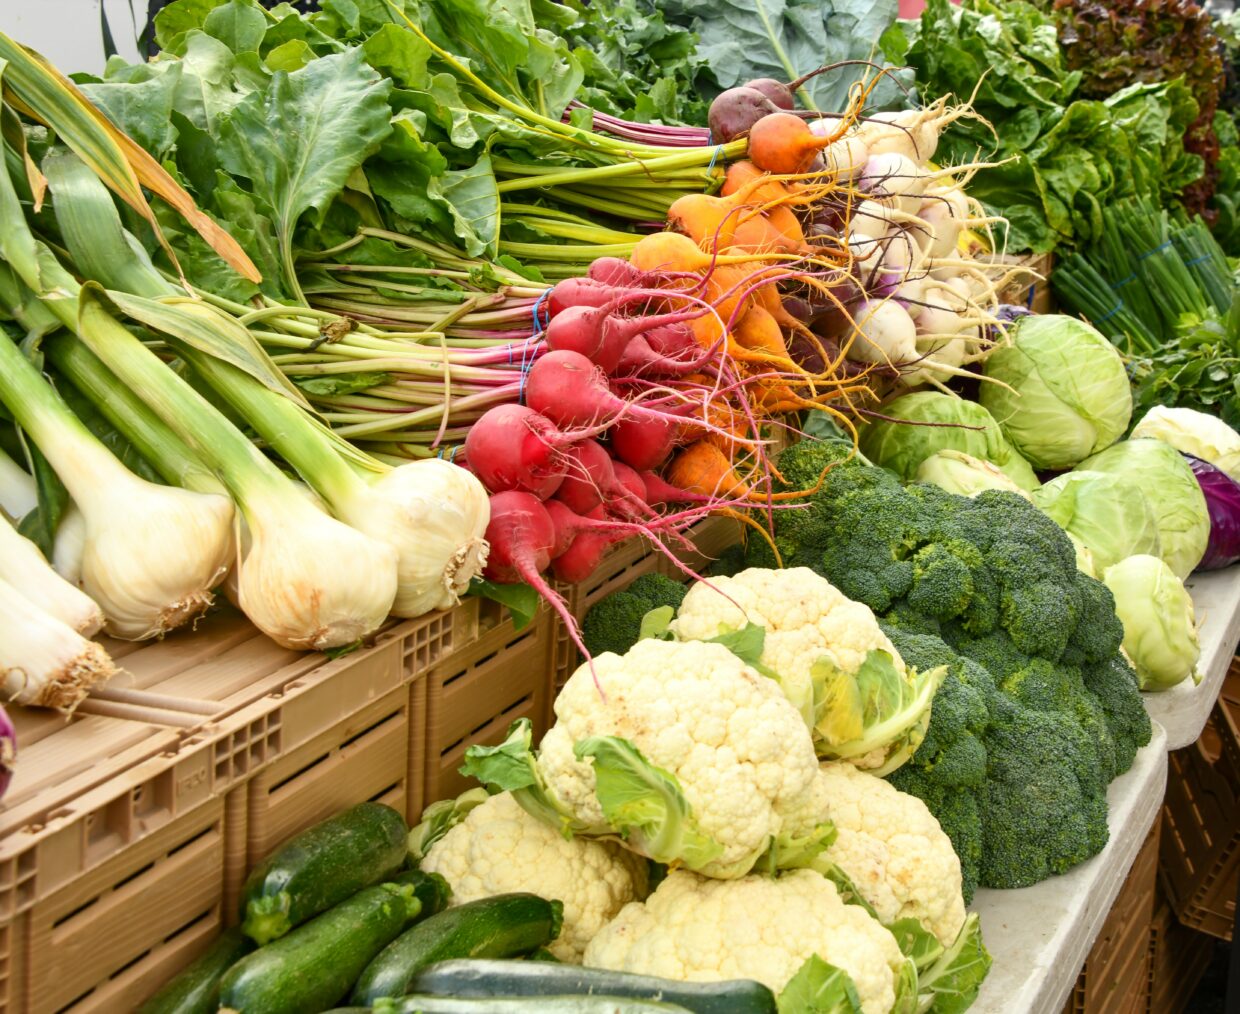 Vegetables like garlic, cauliflower, beets, and cabbage from a farm